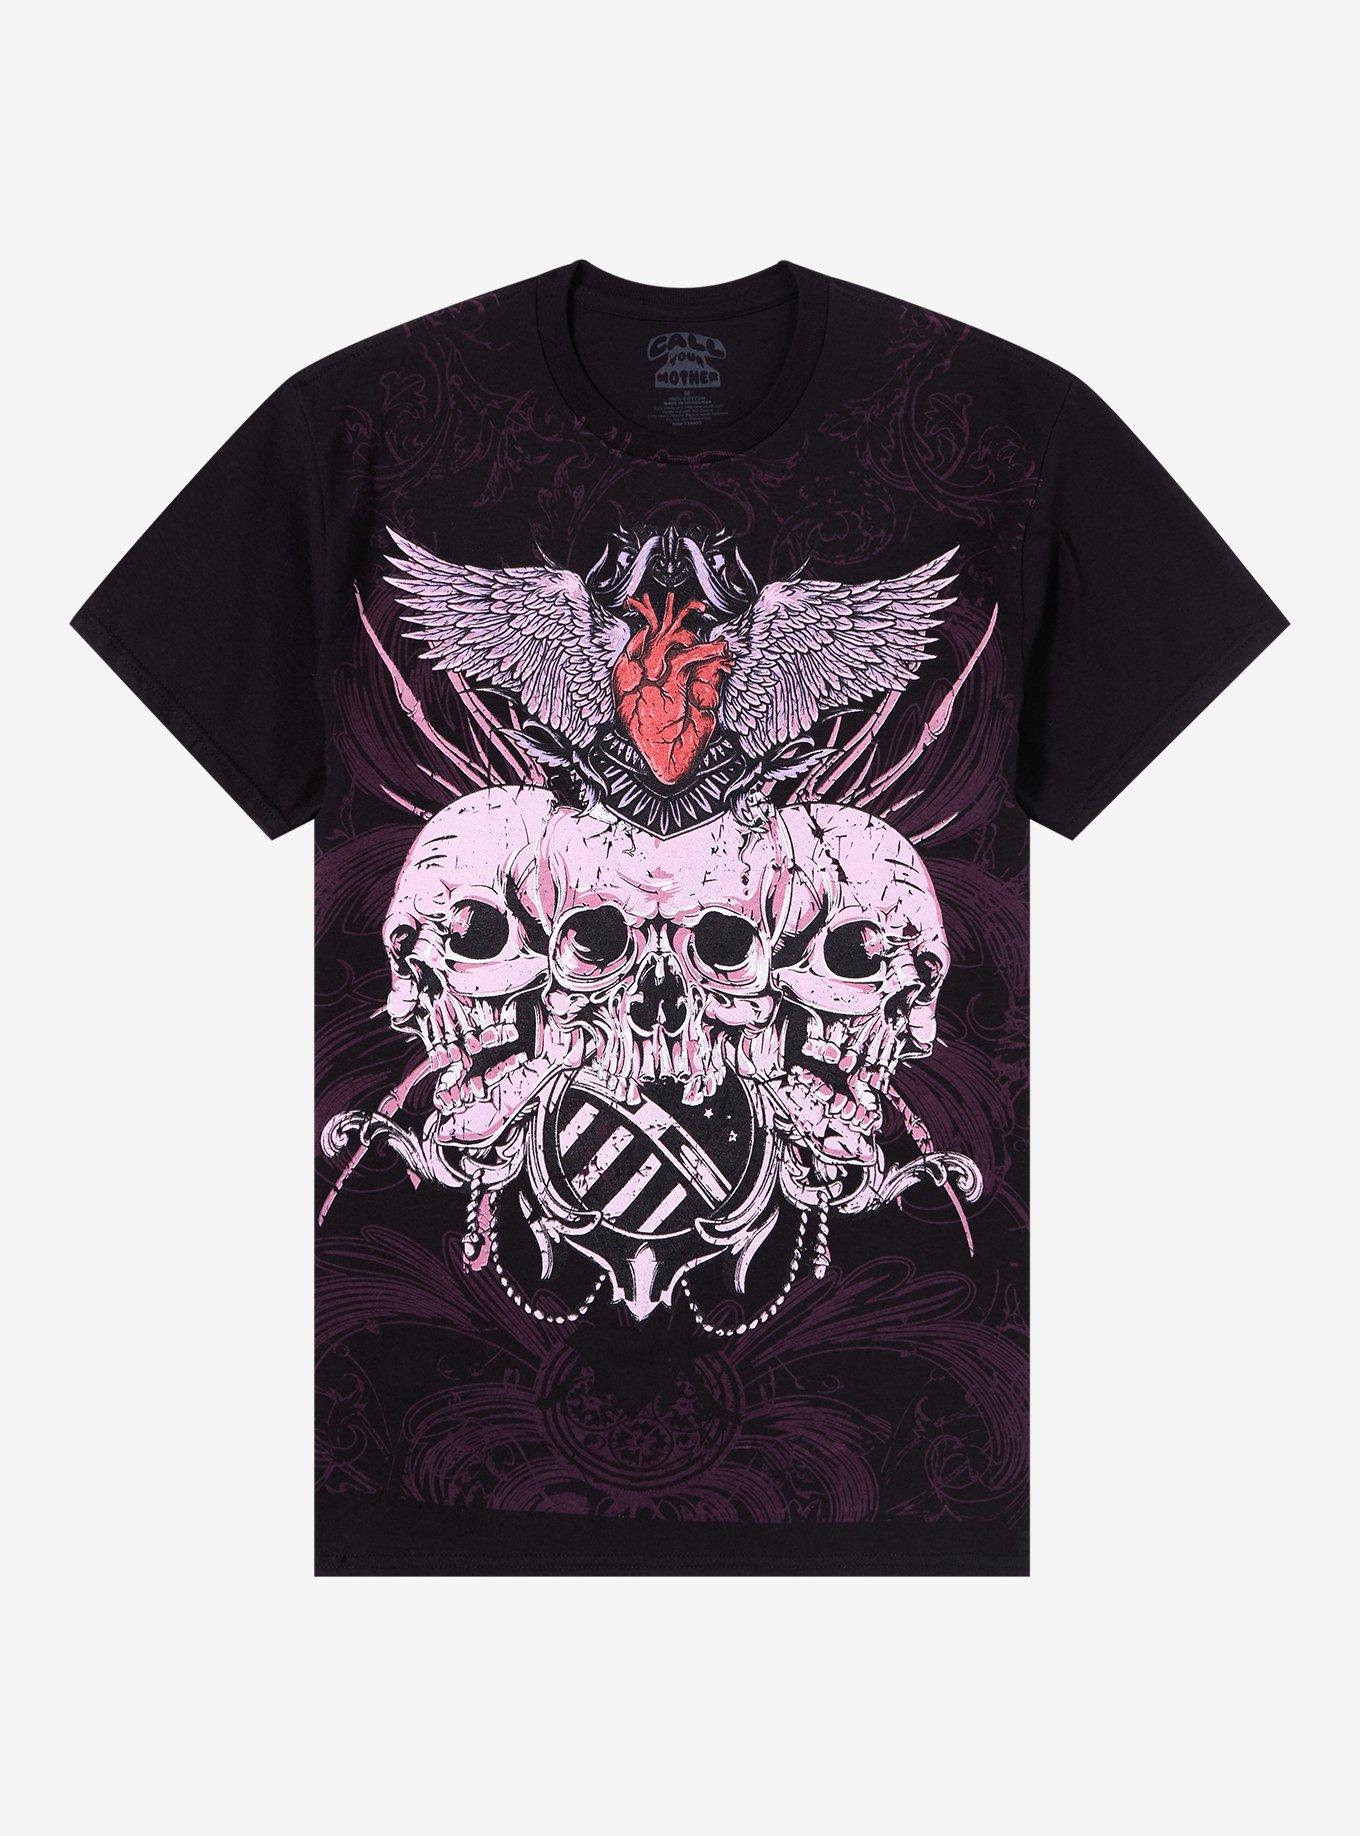 Skull Trio Winged Heart Boyfriend Fit Girls T-Shirt By Call Your Mother, MULTI, hi-res